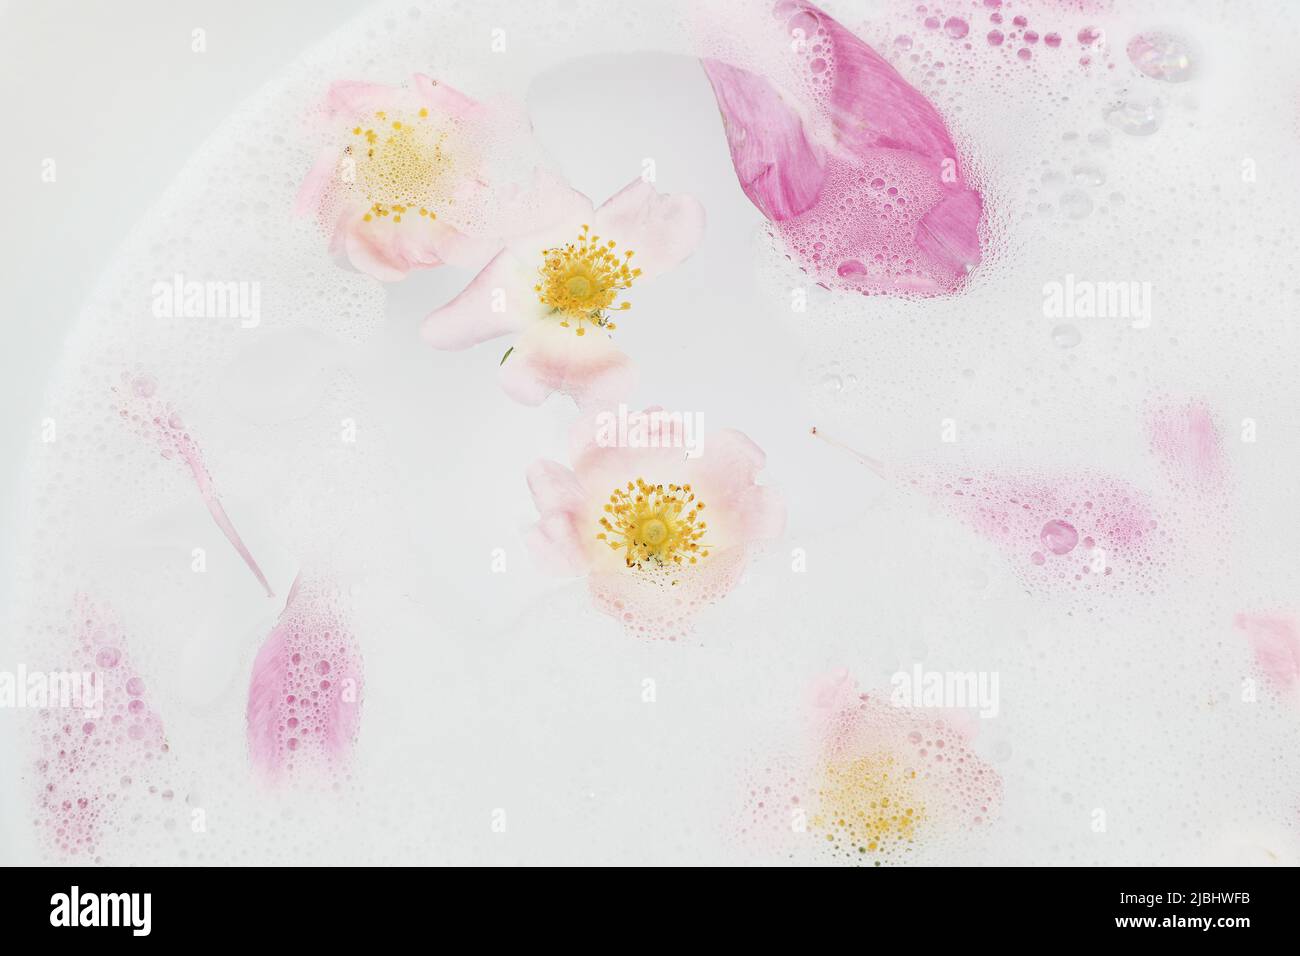 Pink dog rose flowers and peony petals floating and sinking in water. Fam bath, spa. Health, cosmetic and relaxation concept. Floral feminine web Stock Photo